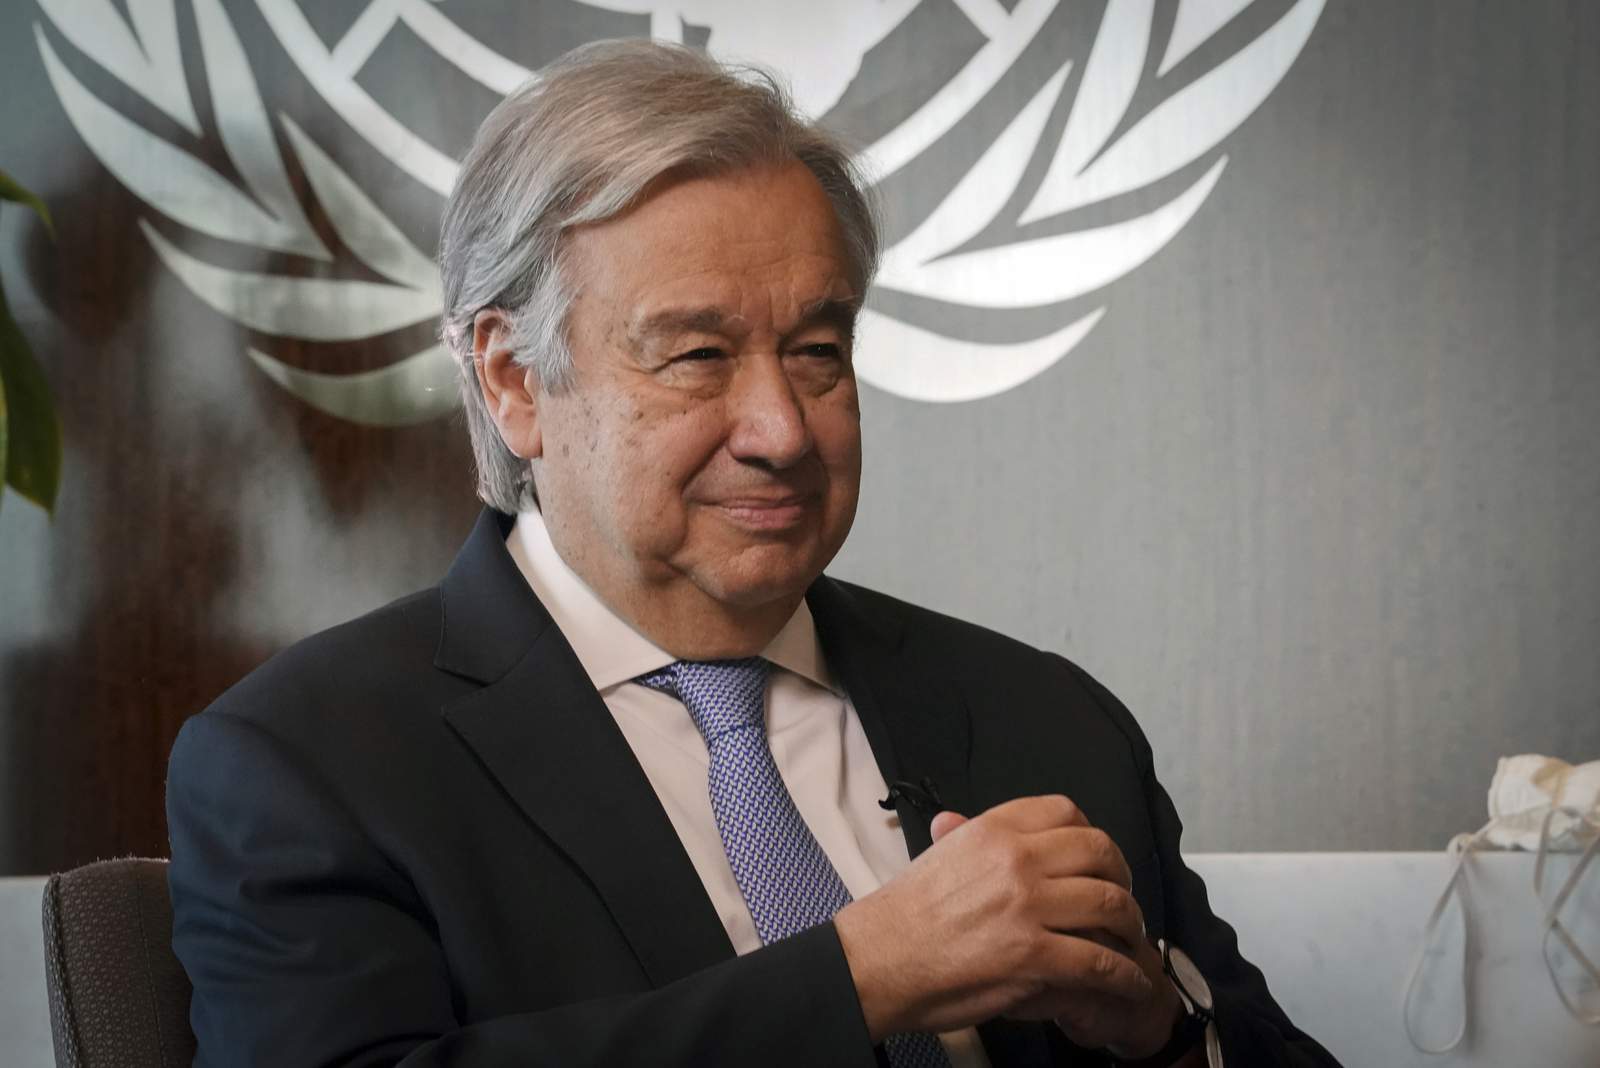 UN chief appeals for cease-fires, warns pandemic wins wars